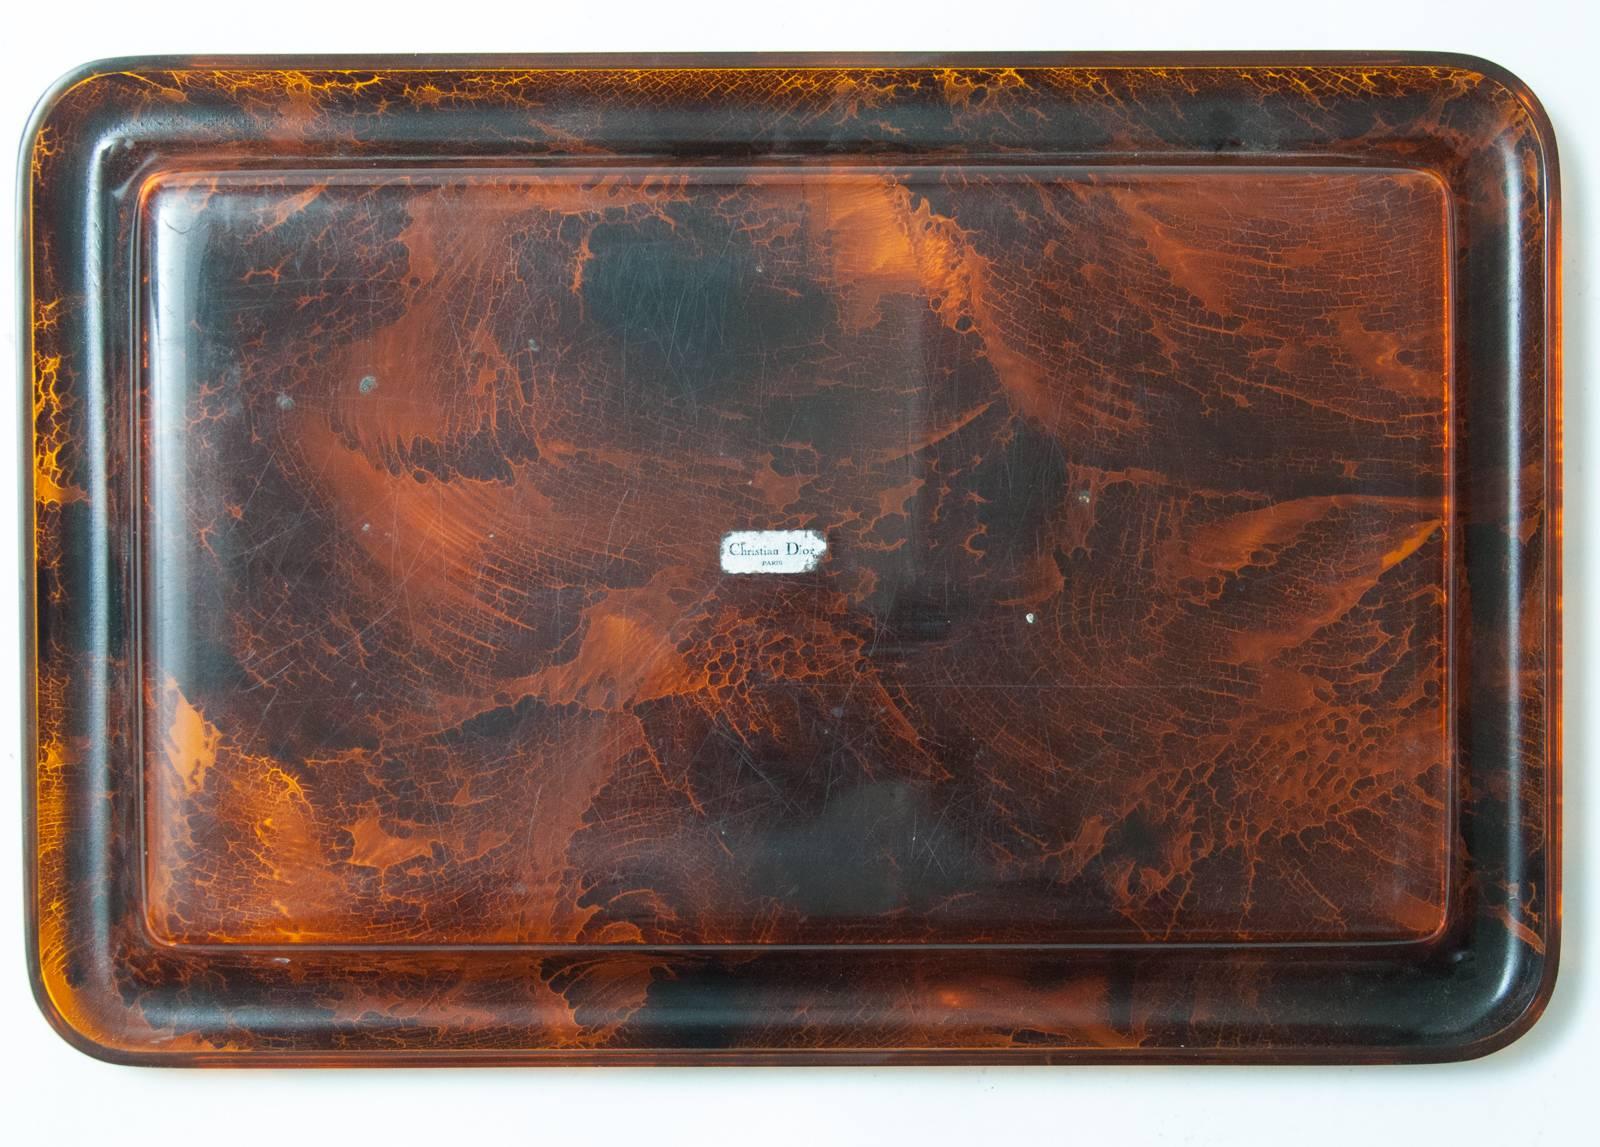 Late 20th Century Midcentury Faux Tortoiseshell Tray by Christian Dior with Original Label